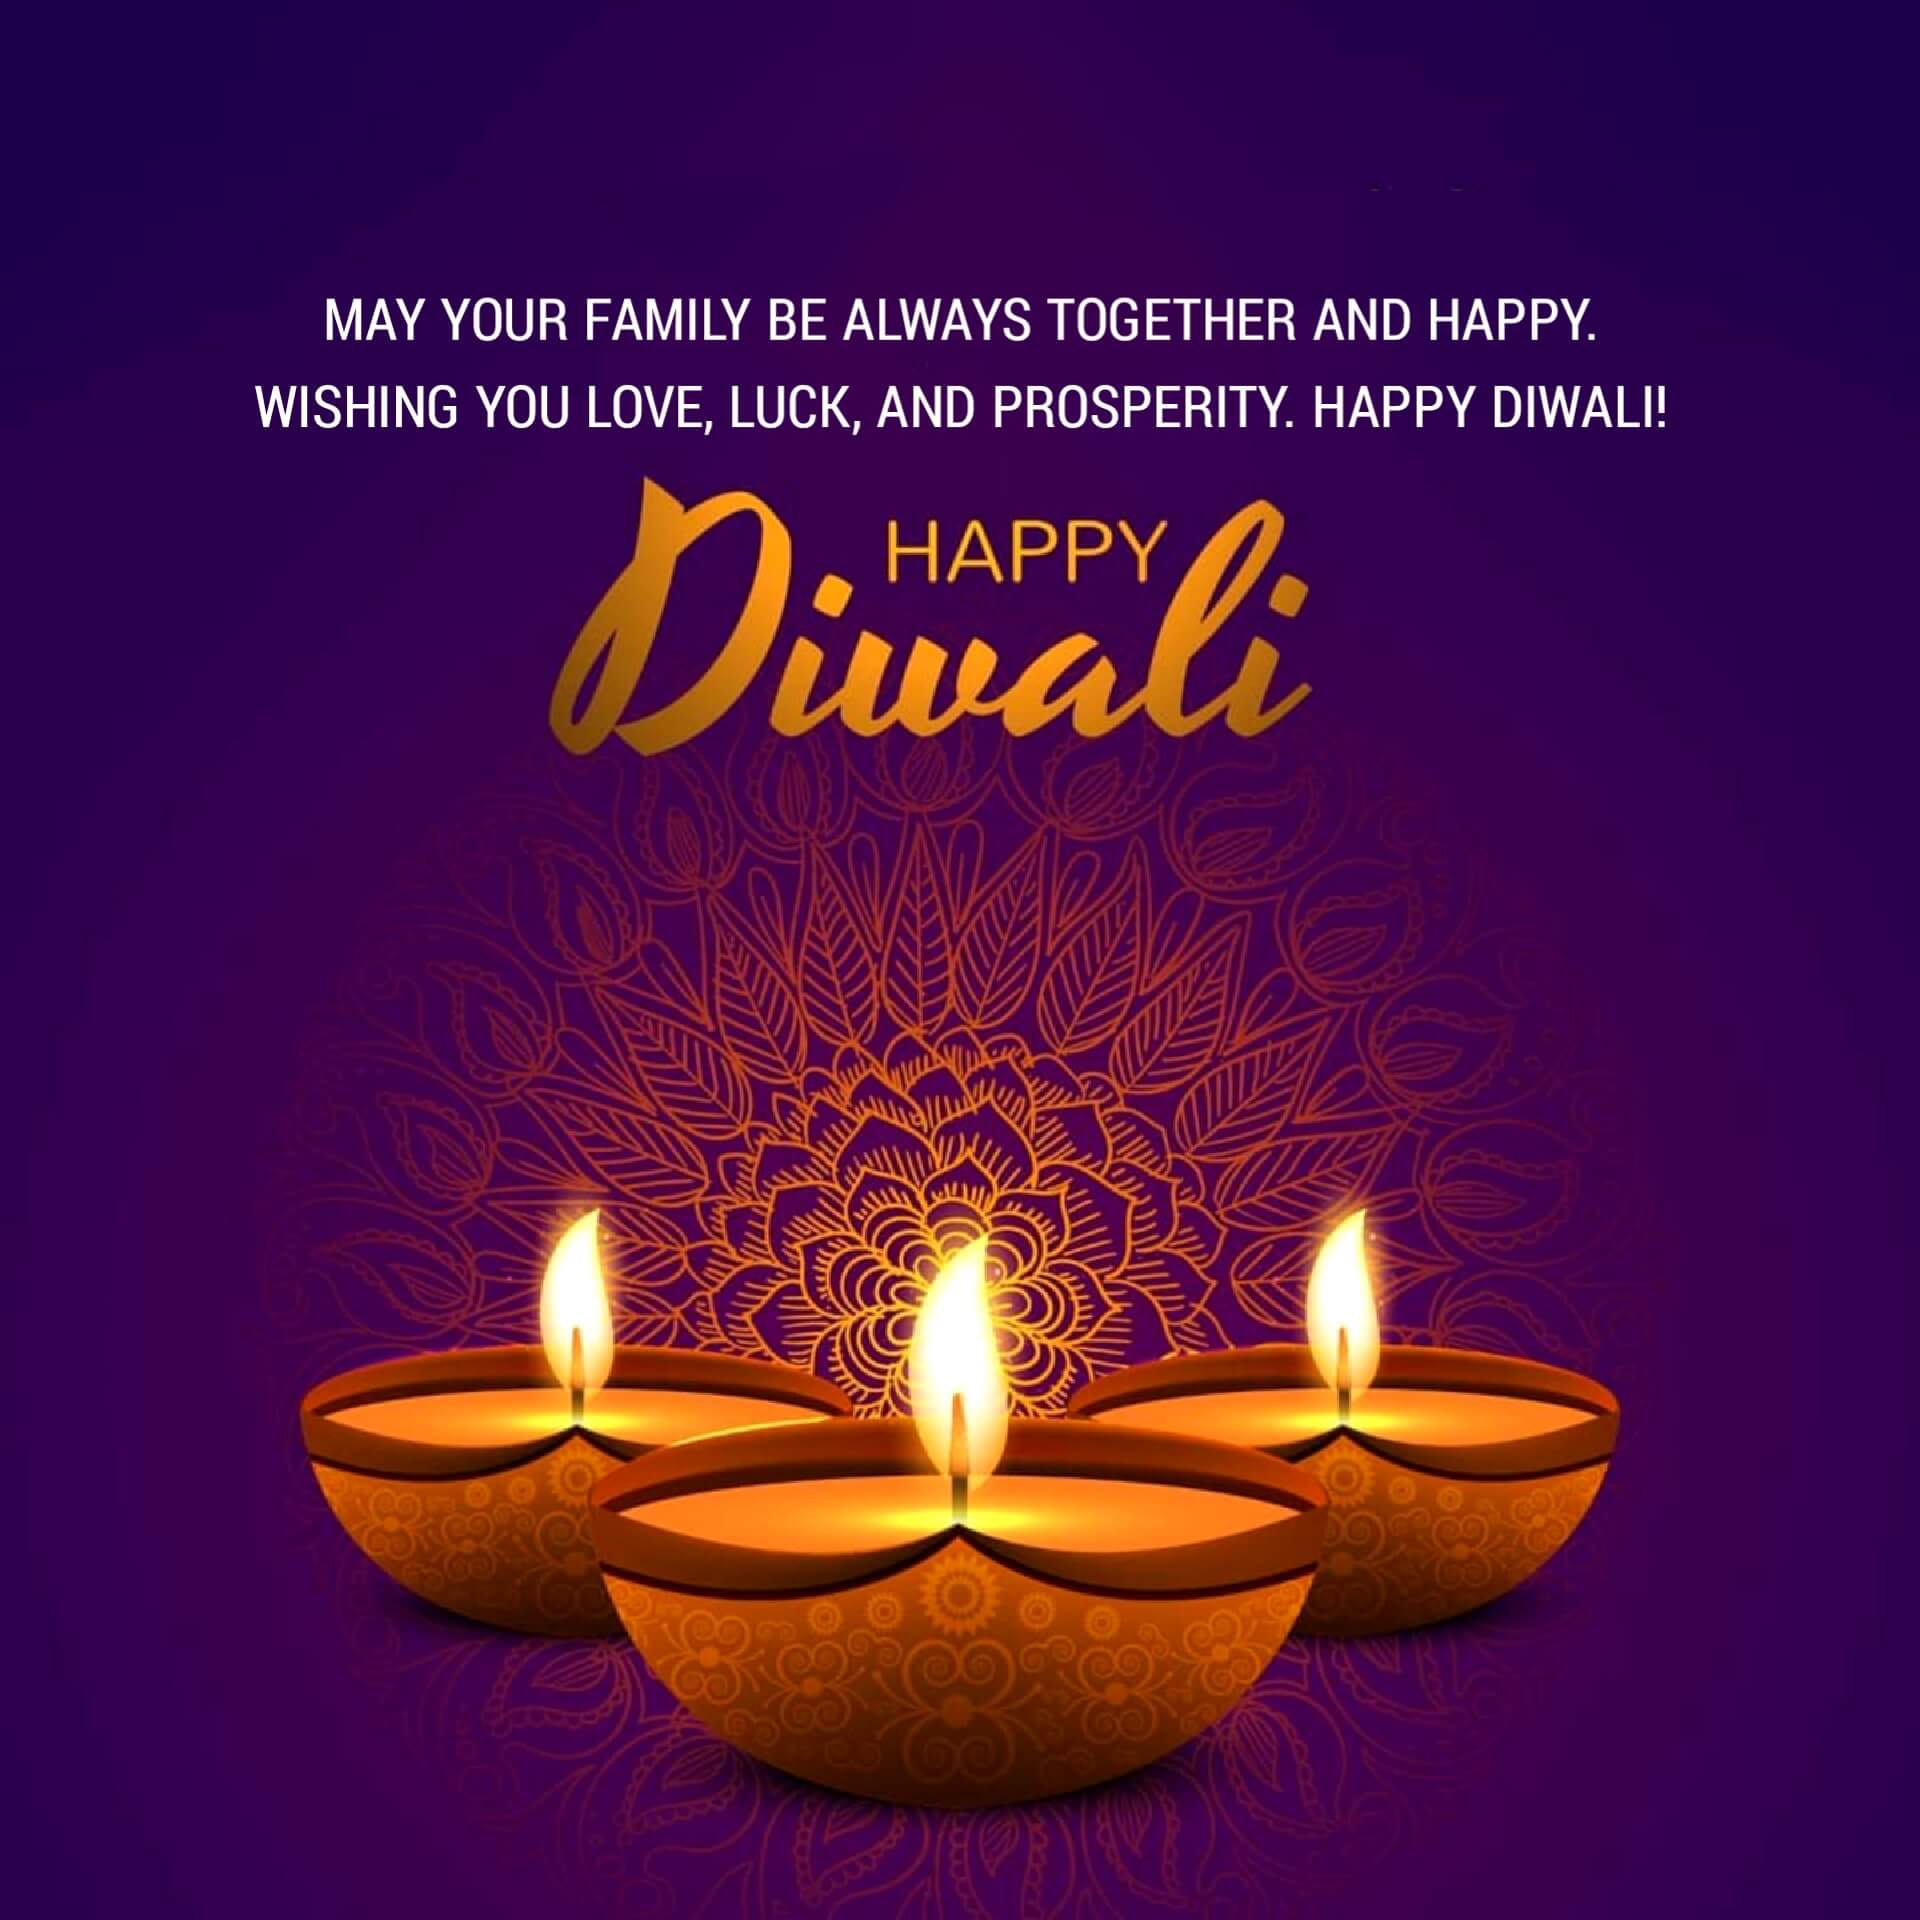 Diwali Wishes for Family